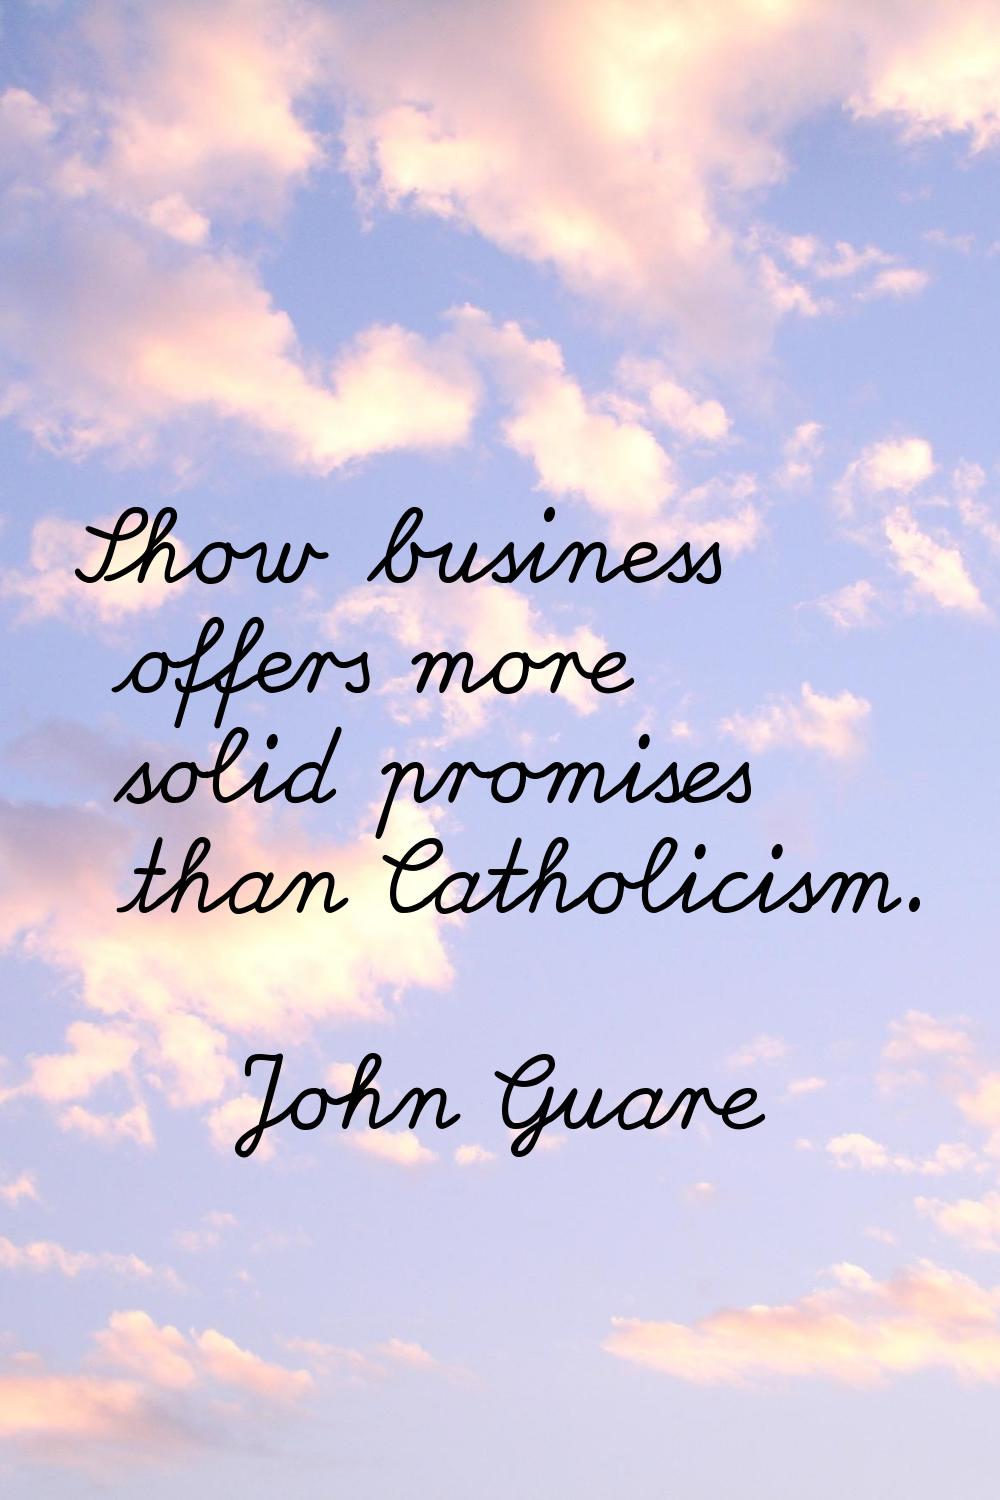 Show business offers more solid promises than Catholicism.